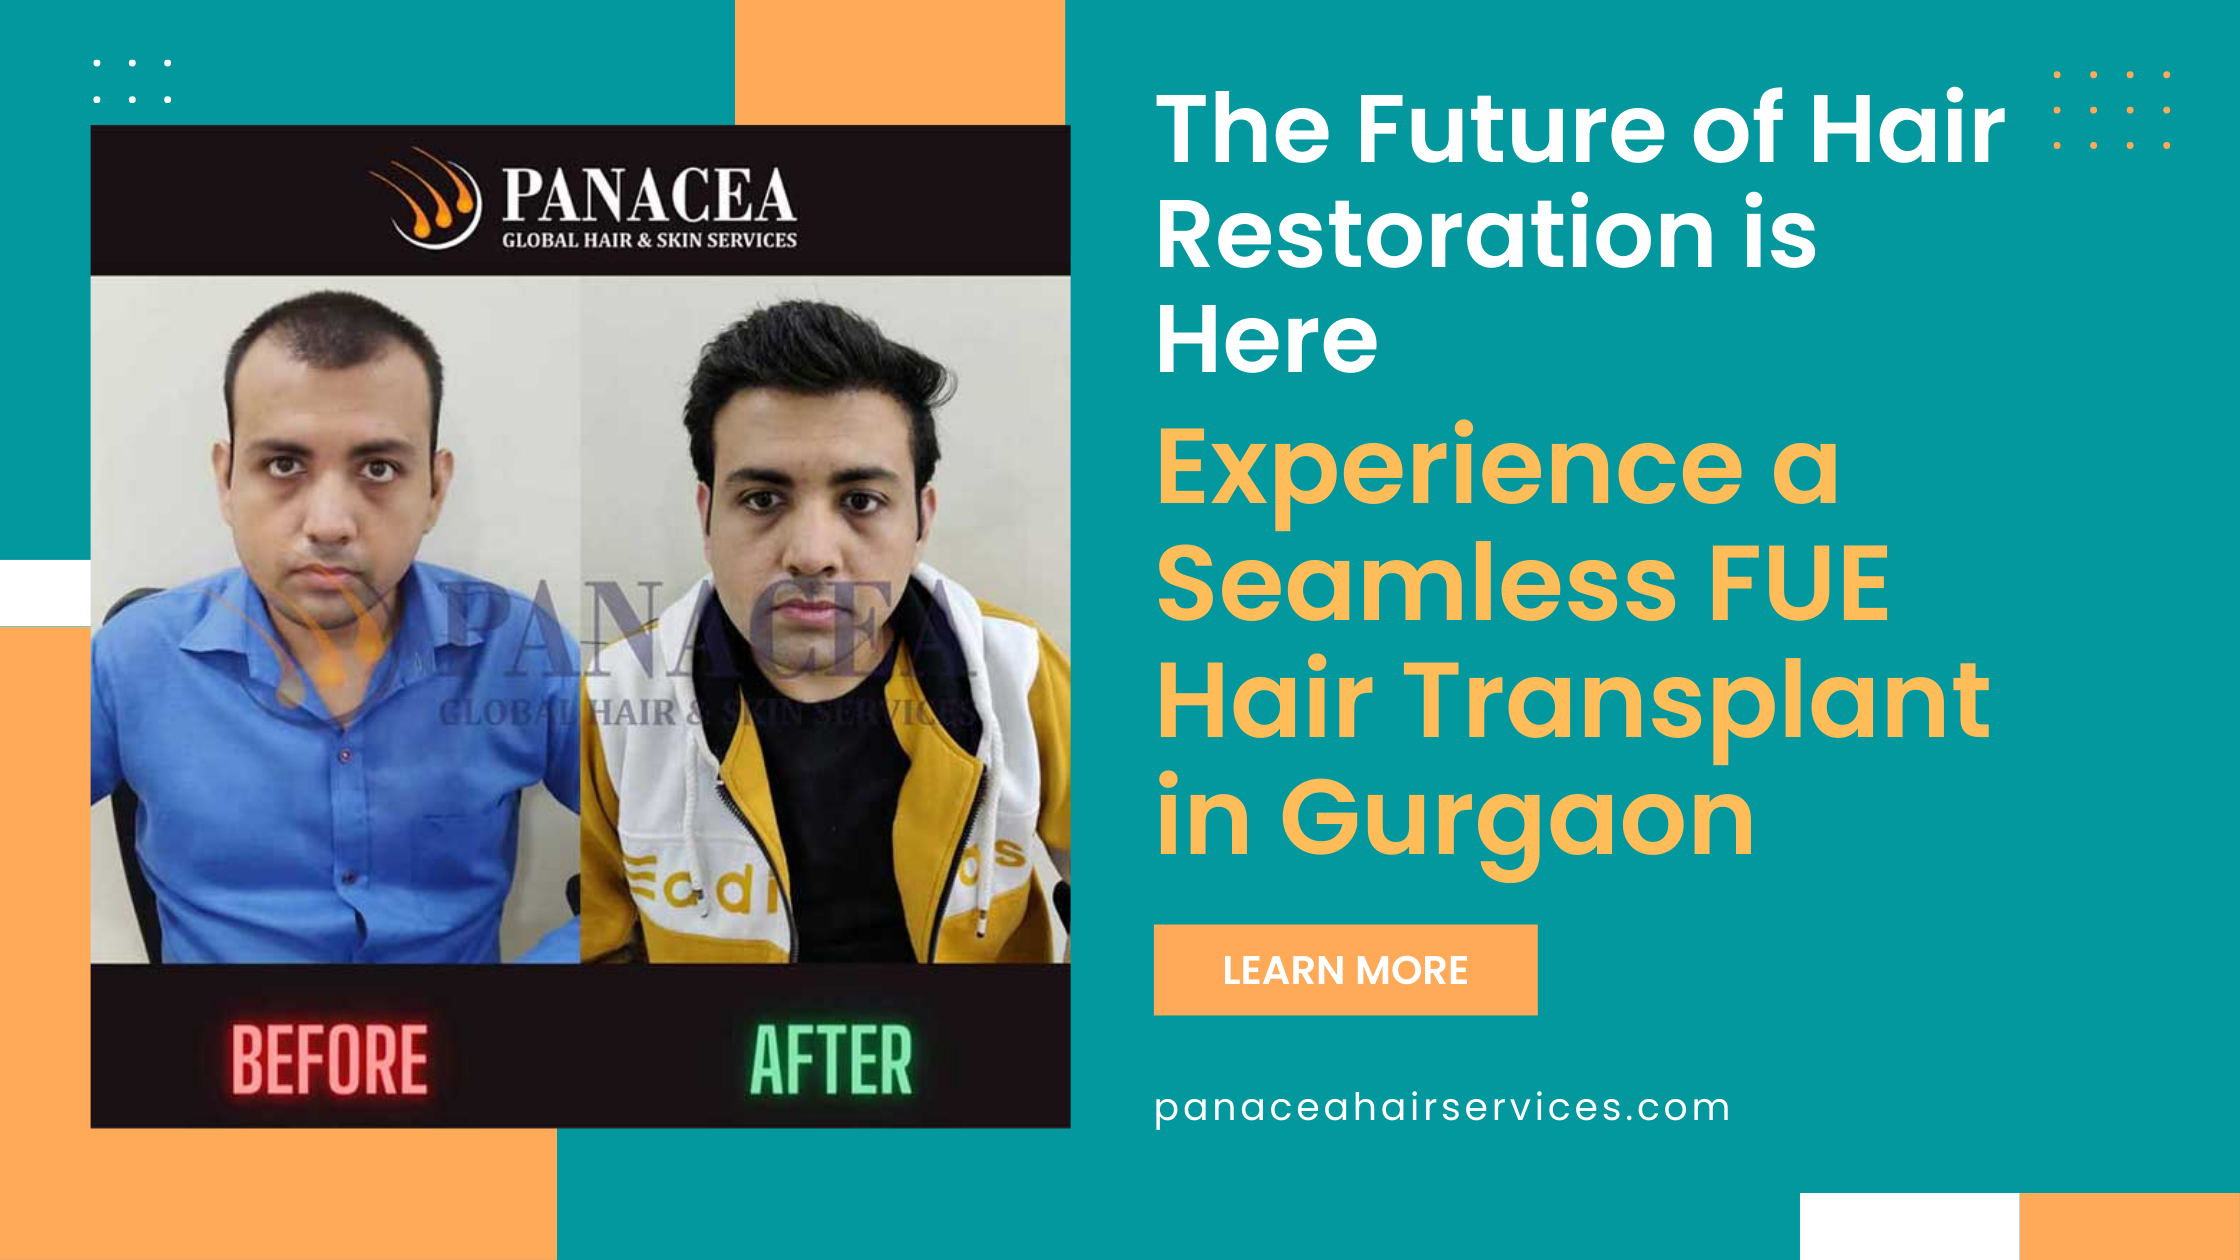 The Future of Hair Restoration is Here Experience a Seamless FUE Hair Transplant in Gurgaon